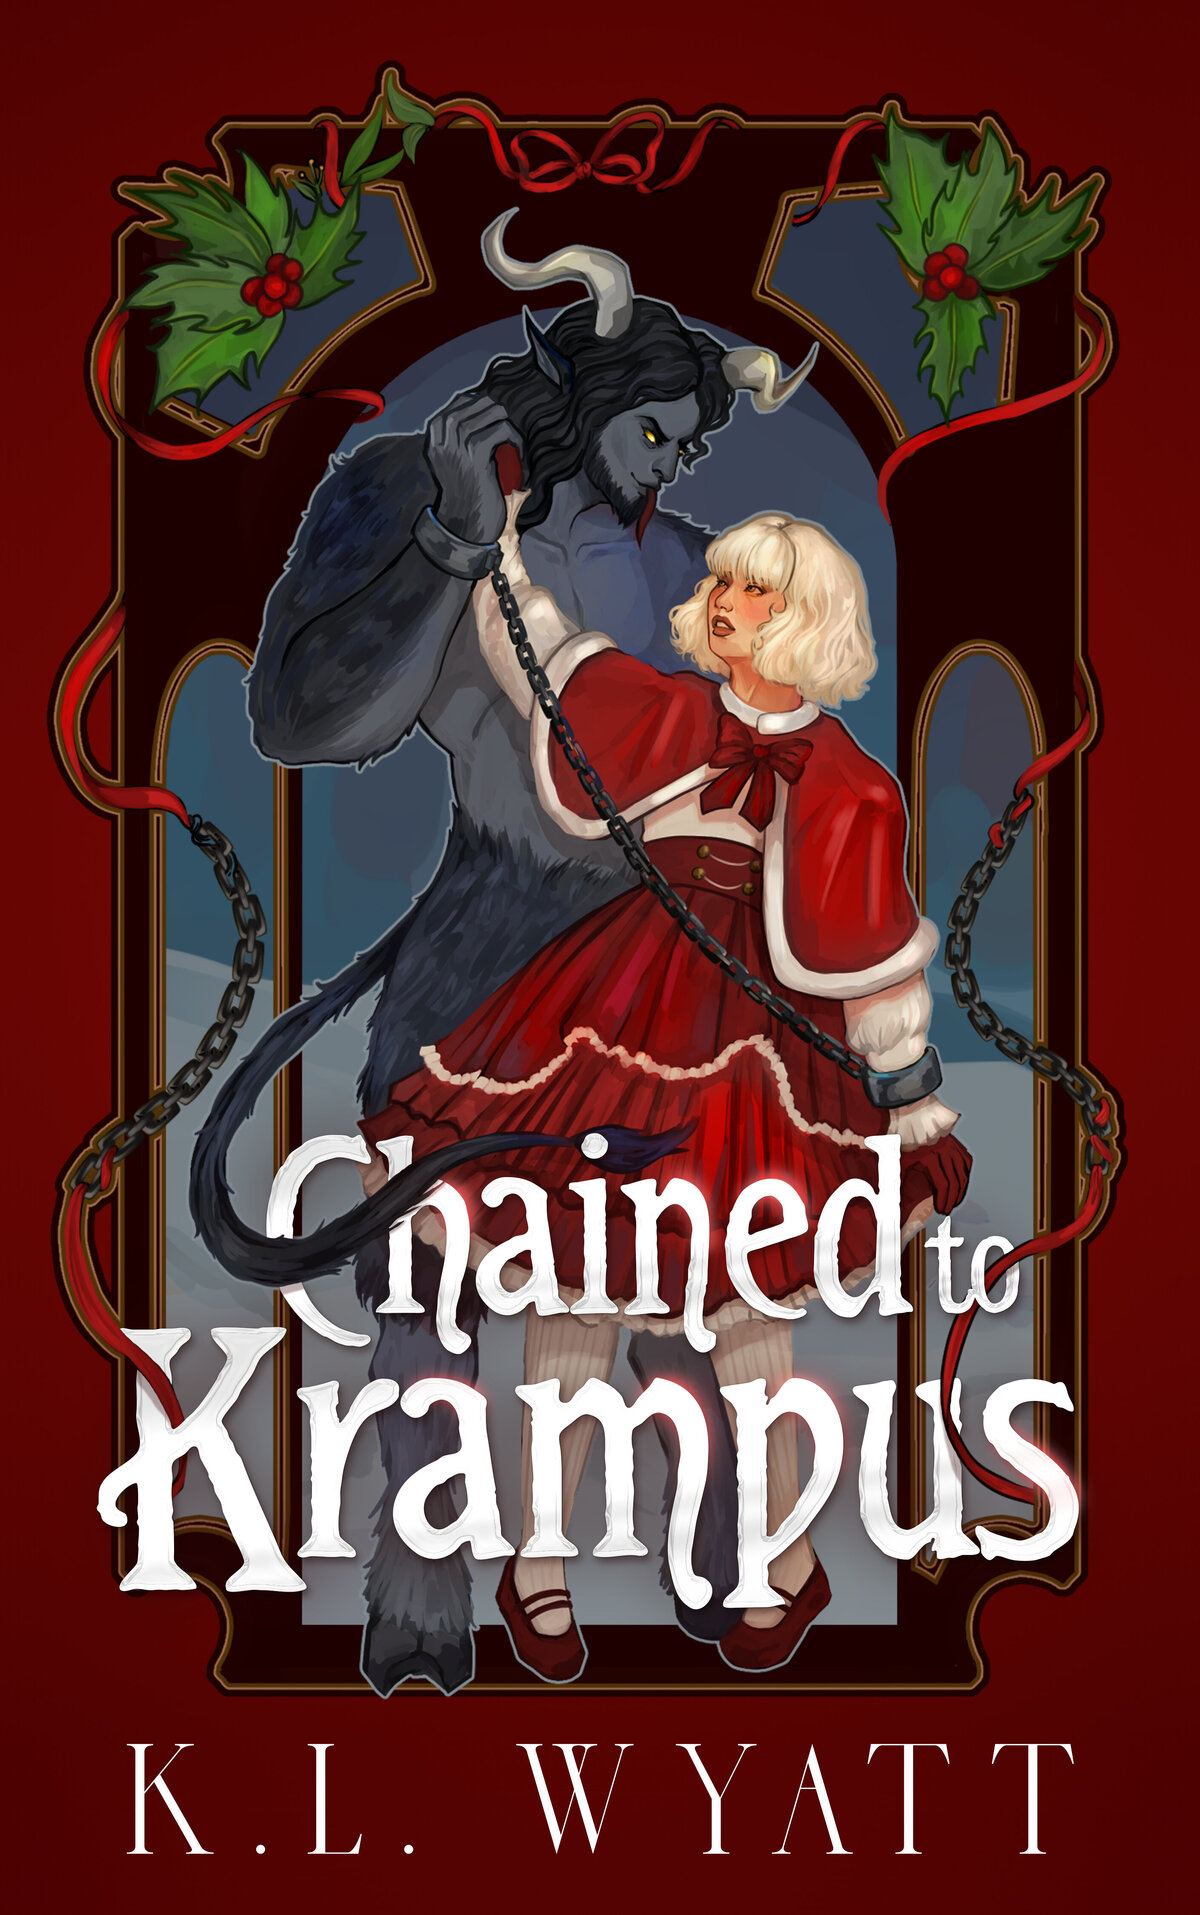 Chained to Krampus Ebook v3 (1)